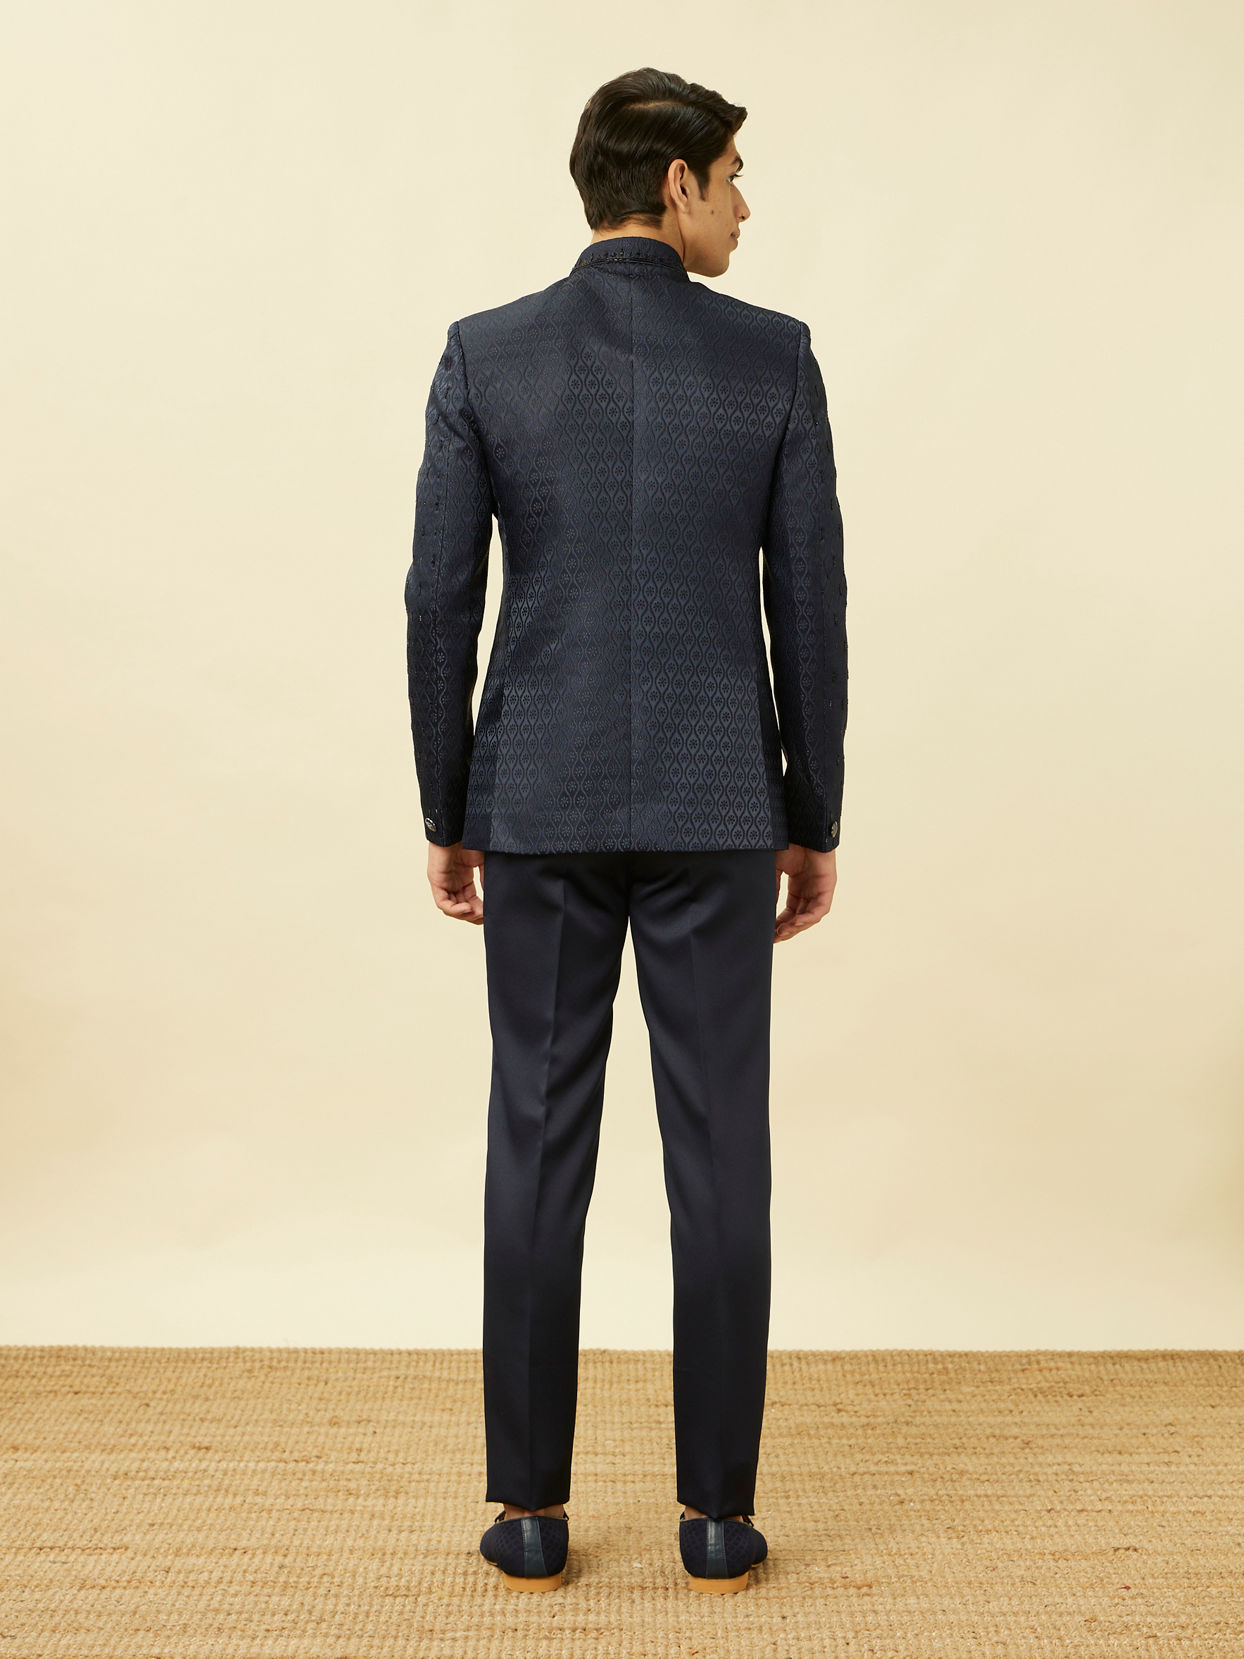 Buy Sapphire Blue Ogee Patterned Suit Online in India @Manyavar - Suit ...